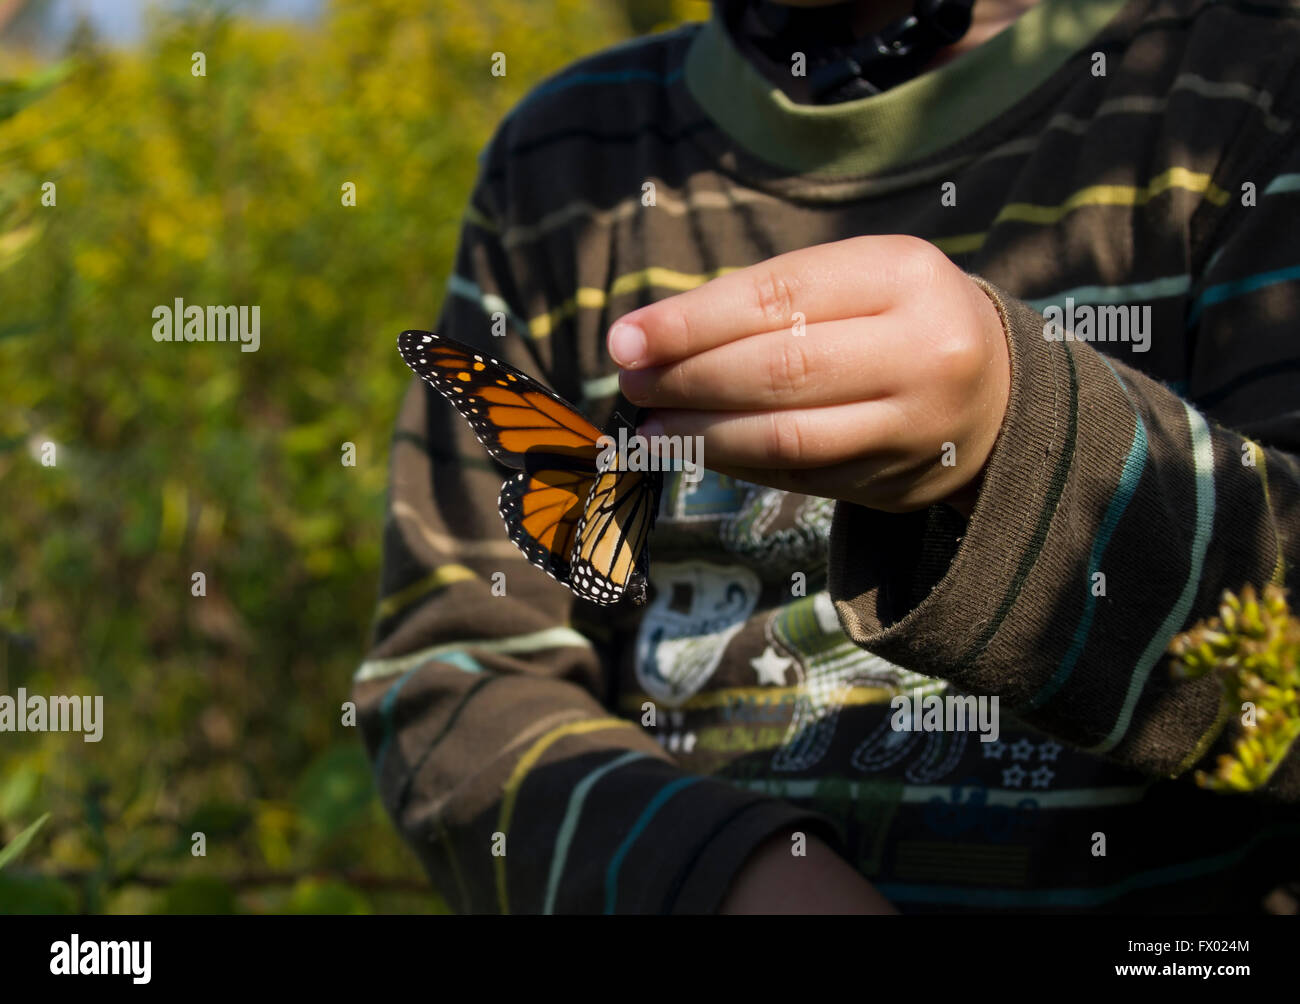 Monarch butterfly (Danaus plexippus) held in hand, before the migration back to Mexico. Stock Photo